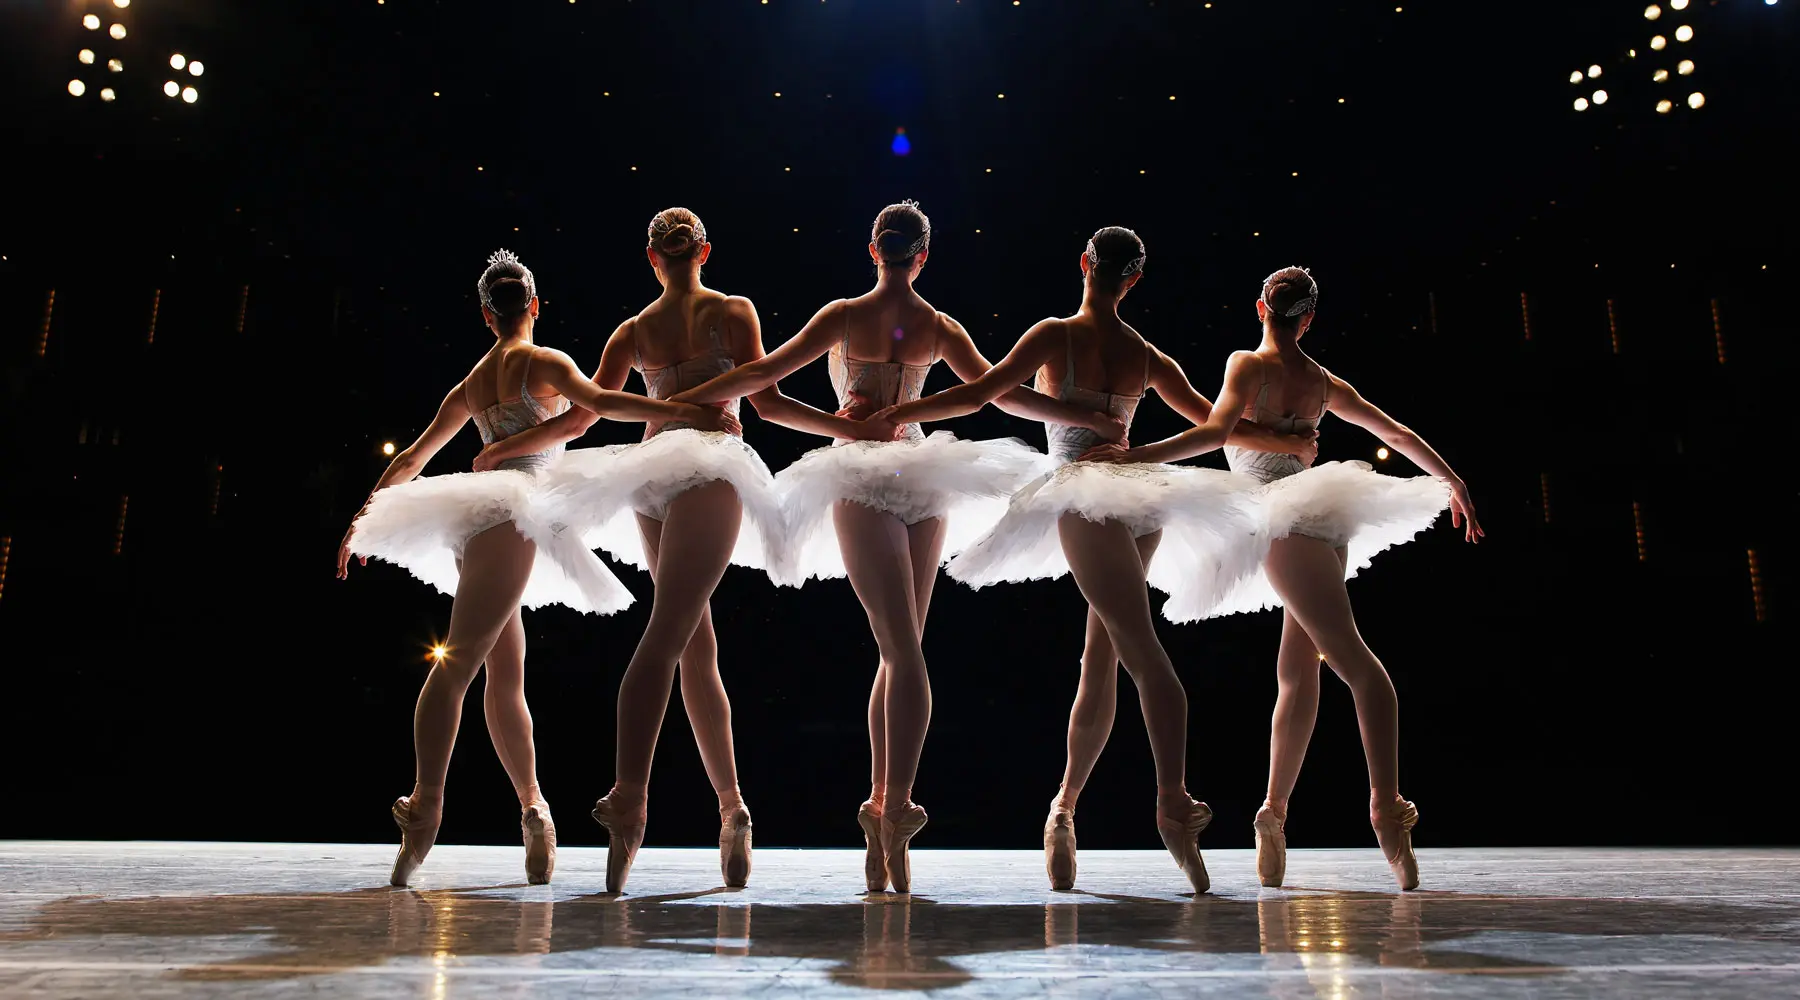 Five ballerinas en pointe on stage, arms around each other, rear view